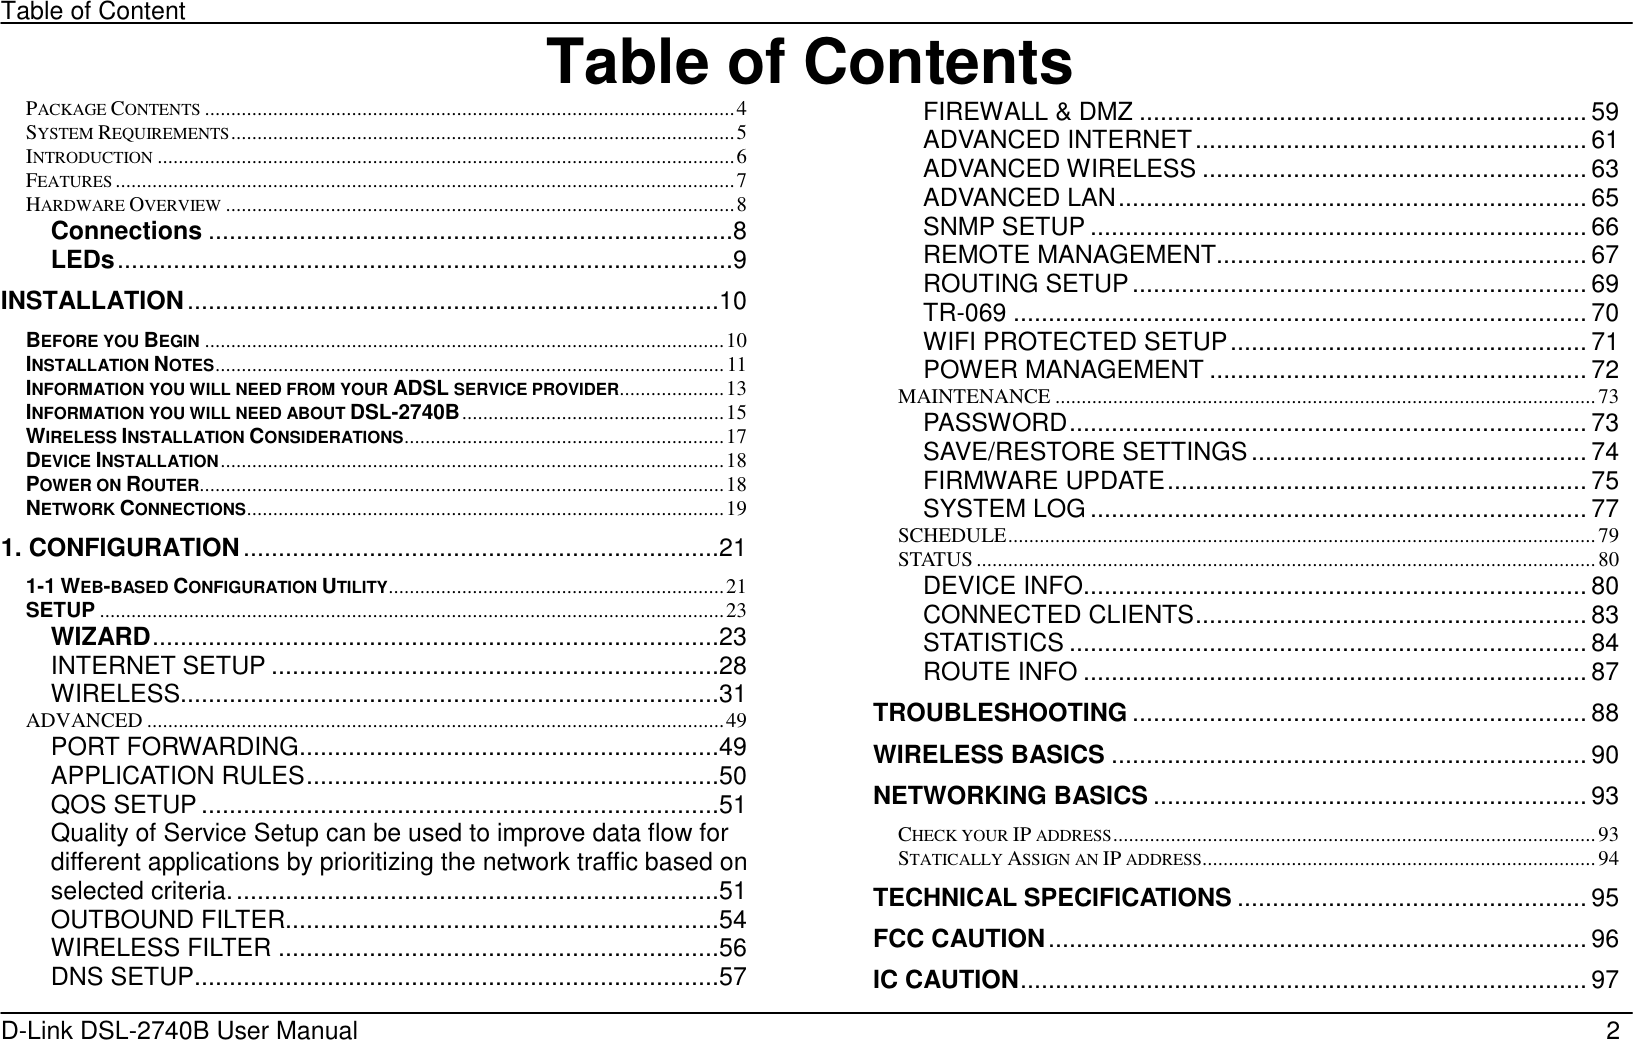 Table of Content D-Link DSL-2740B User Manual                                                  2Table of ContentsPACKAGE CONTENTS.....................................................................................................4 SYSTEM REQUIREMENTS................................................................................................5 INTRODUCTION..............................................................................................................6 FEATURES......................................................................................................................7 HARDWARE OVERVIEW.................................................................................................8 Connections ...........................................................................8 LEDs........................................................................................9 INSTALLATION............................................................................10 BEFORE YOU BEGIN...................................................................................................10 INSTALLATION NOTES.................................................................................................11 INFORMATION YOU WILL NEED FROM YOUR ADSL SERVICE PROVIDER....................13 INFORMATION YOU WILL NEED ABOUT DSL-2740B..................................................15 WIRELESS INSTALLATION CONSIDERATIONS.............................................................17 DEVICE INSTALLATION................................................................................................18 POWER ON ROUTER....................................................................................................18 NETWORK CONNECTIONS...........................................................................................19 1. CONFIGURATION....................................................................21 1-1 WEB-BASED CONFIGURATION UTILITY................................................................21 SETUP .......................................................................................................................23 WIZARD.................................................................................23 INTERNET SETUP ................................................................28 WIRELESS.............................................................................31 ADVANCED ..............................................................................................................49 PORT FORWARDING............................................................49 APPLICATION RULES...........................................................50 QOS SETUP ..........................................................................51 Quality of Service Setup can be used to improve data flow for different applications by prioritizing the network traffic based on selected criteria......................................................................51 OUTBOUND FILTER..............................................................54 WIRELESS FILTER ...............................................................56 DNS SETUP...........................................................................57 FIREWALL &amp; DMZ ................................................................ 59 ADVANCED INTERNET........................................................ 61 ADVANCED WIRELESS ....................................................... 63 ADVANCED LAN................................................................... 65 SNMP SETUP ....................................................................... 66 REMOTE MANAGEMENT..................................................... 67 ROUTING SETUP................................................................. 69 TR-069 .................................................................................. 70 WIFI PROTECTED SETUP................................................... 71 POWER MANAGEMENT ...................................................... 72 MAINTENANCE .......................................................................................................73 PASSWORD.......................................................................... 73 SAVE/RESTORE SETTINGS................................................ 74 FIRMWARE UPDATE............................................................ 75 SYSTEM LOG .......................................................................77 SCHEDULE................................................................................................................79 STATUS ......................................................................................................................80 DEVICE INFO........................................................................ 80 CONNECTED CLIENTS........................................................ 83 STATISTICS .......................................................................... 84 ROUTE INFO ........................................................................ 87 TROUBLESHOOTING ................................................................. 88 WIRELESS BASICS .................................................................... 90 NETWORKING BASICS .............................................................. 93 CHECK YOUR IP ADDRESS............................................................................................93 STATICALLY ASSIGN AN IP ADDRESS...........................................................................94 TECHNICAL SPECIFICATIONS .................................................. 95 FCC CAUTION............................................................................. 96 IC CAUTION................................................................................. 97 